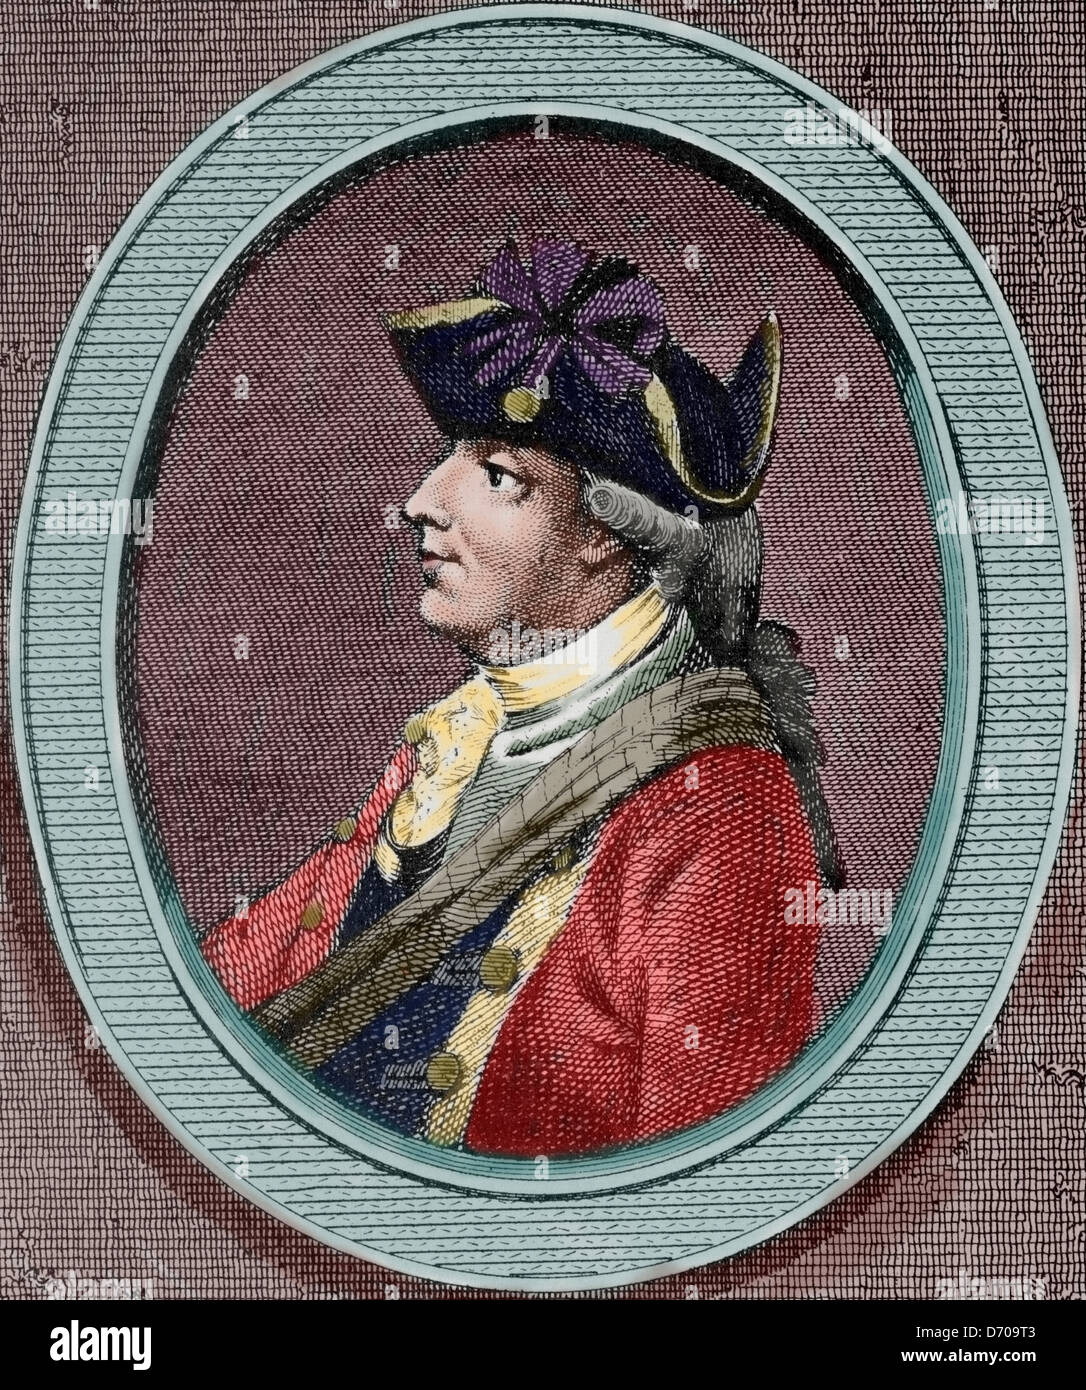 Henry Clinton (1730-1795). British military and politician. Engraving in American Revolution. Colored. Stock Photo